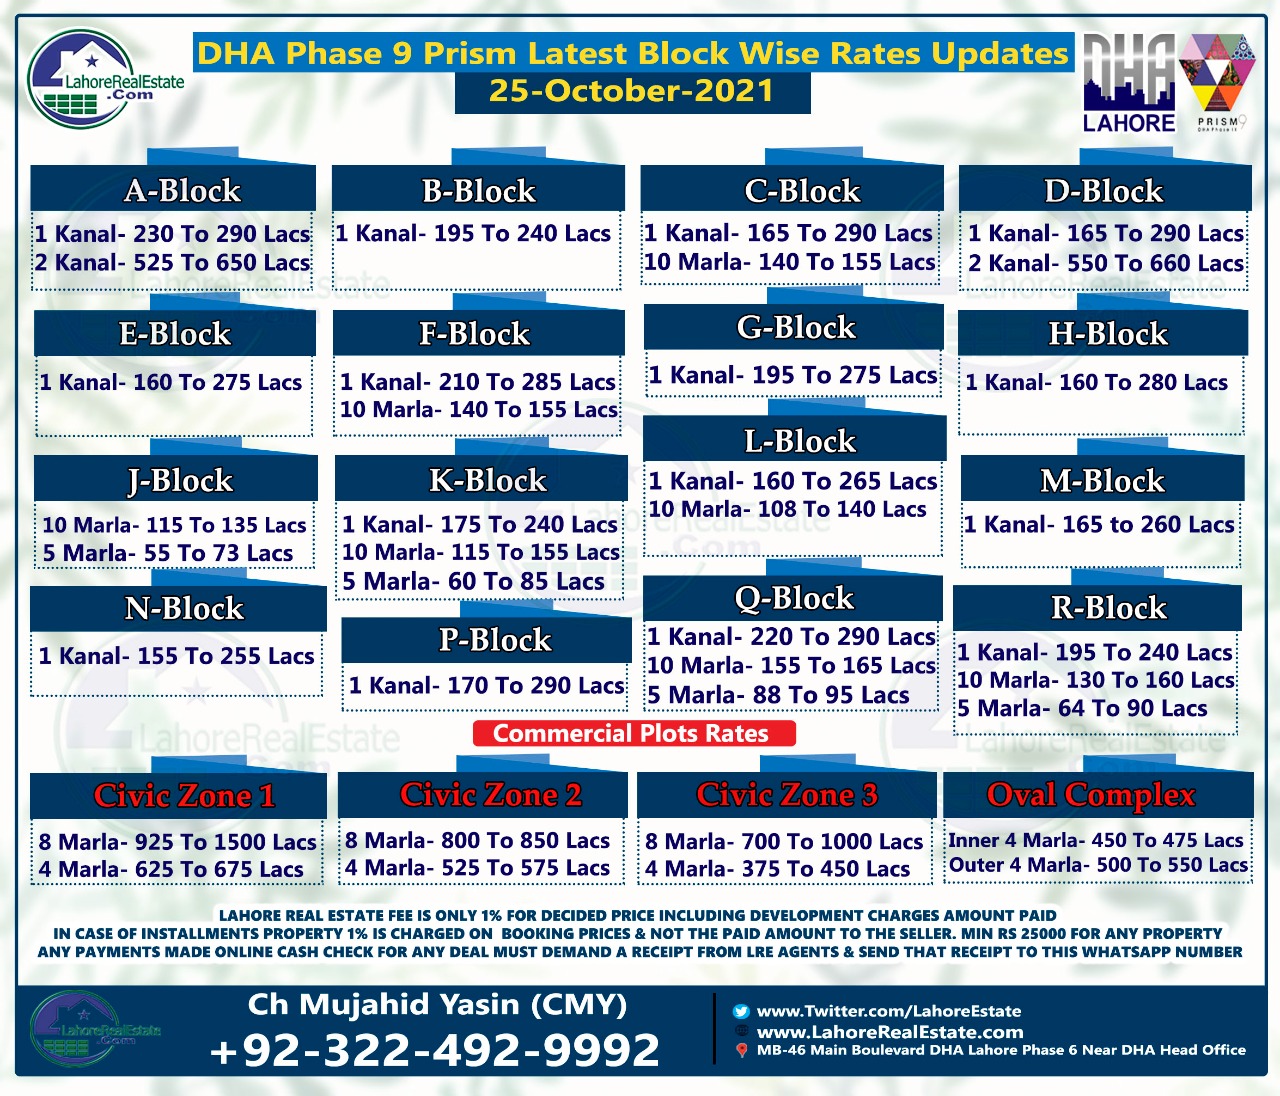 DHA Phase 9 Prism Plot Prices Blockwise Rates Update 30 October 2021